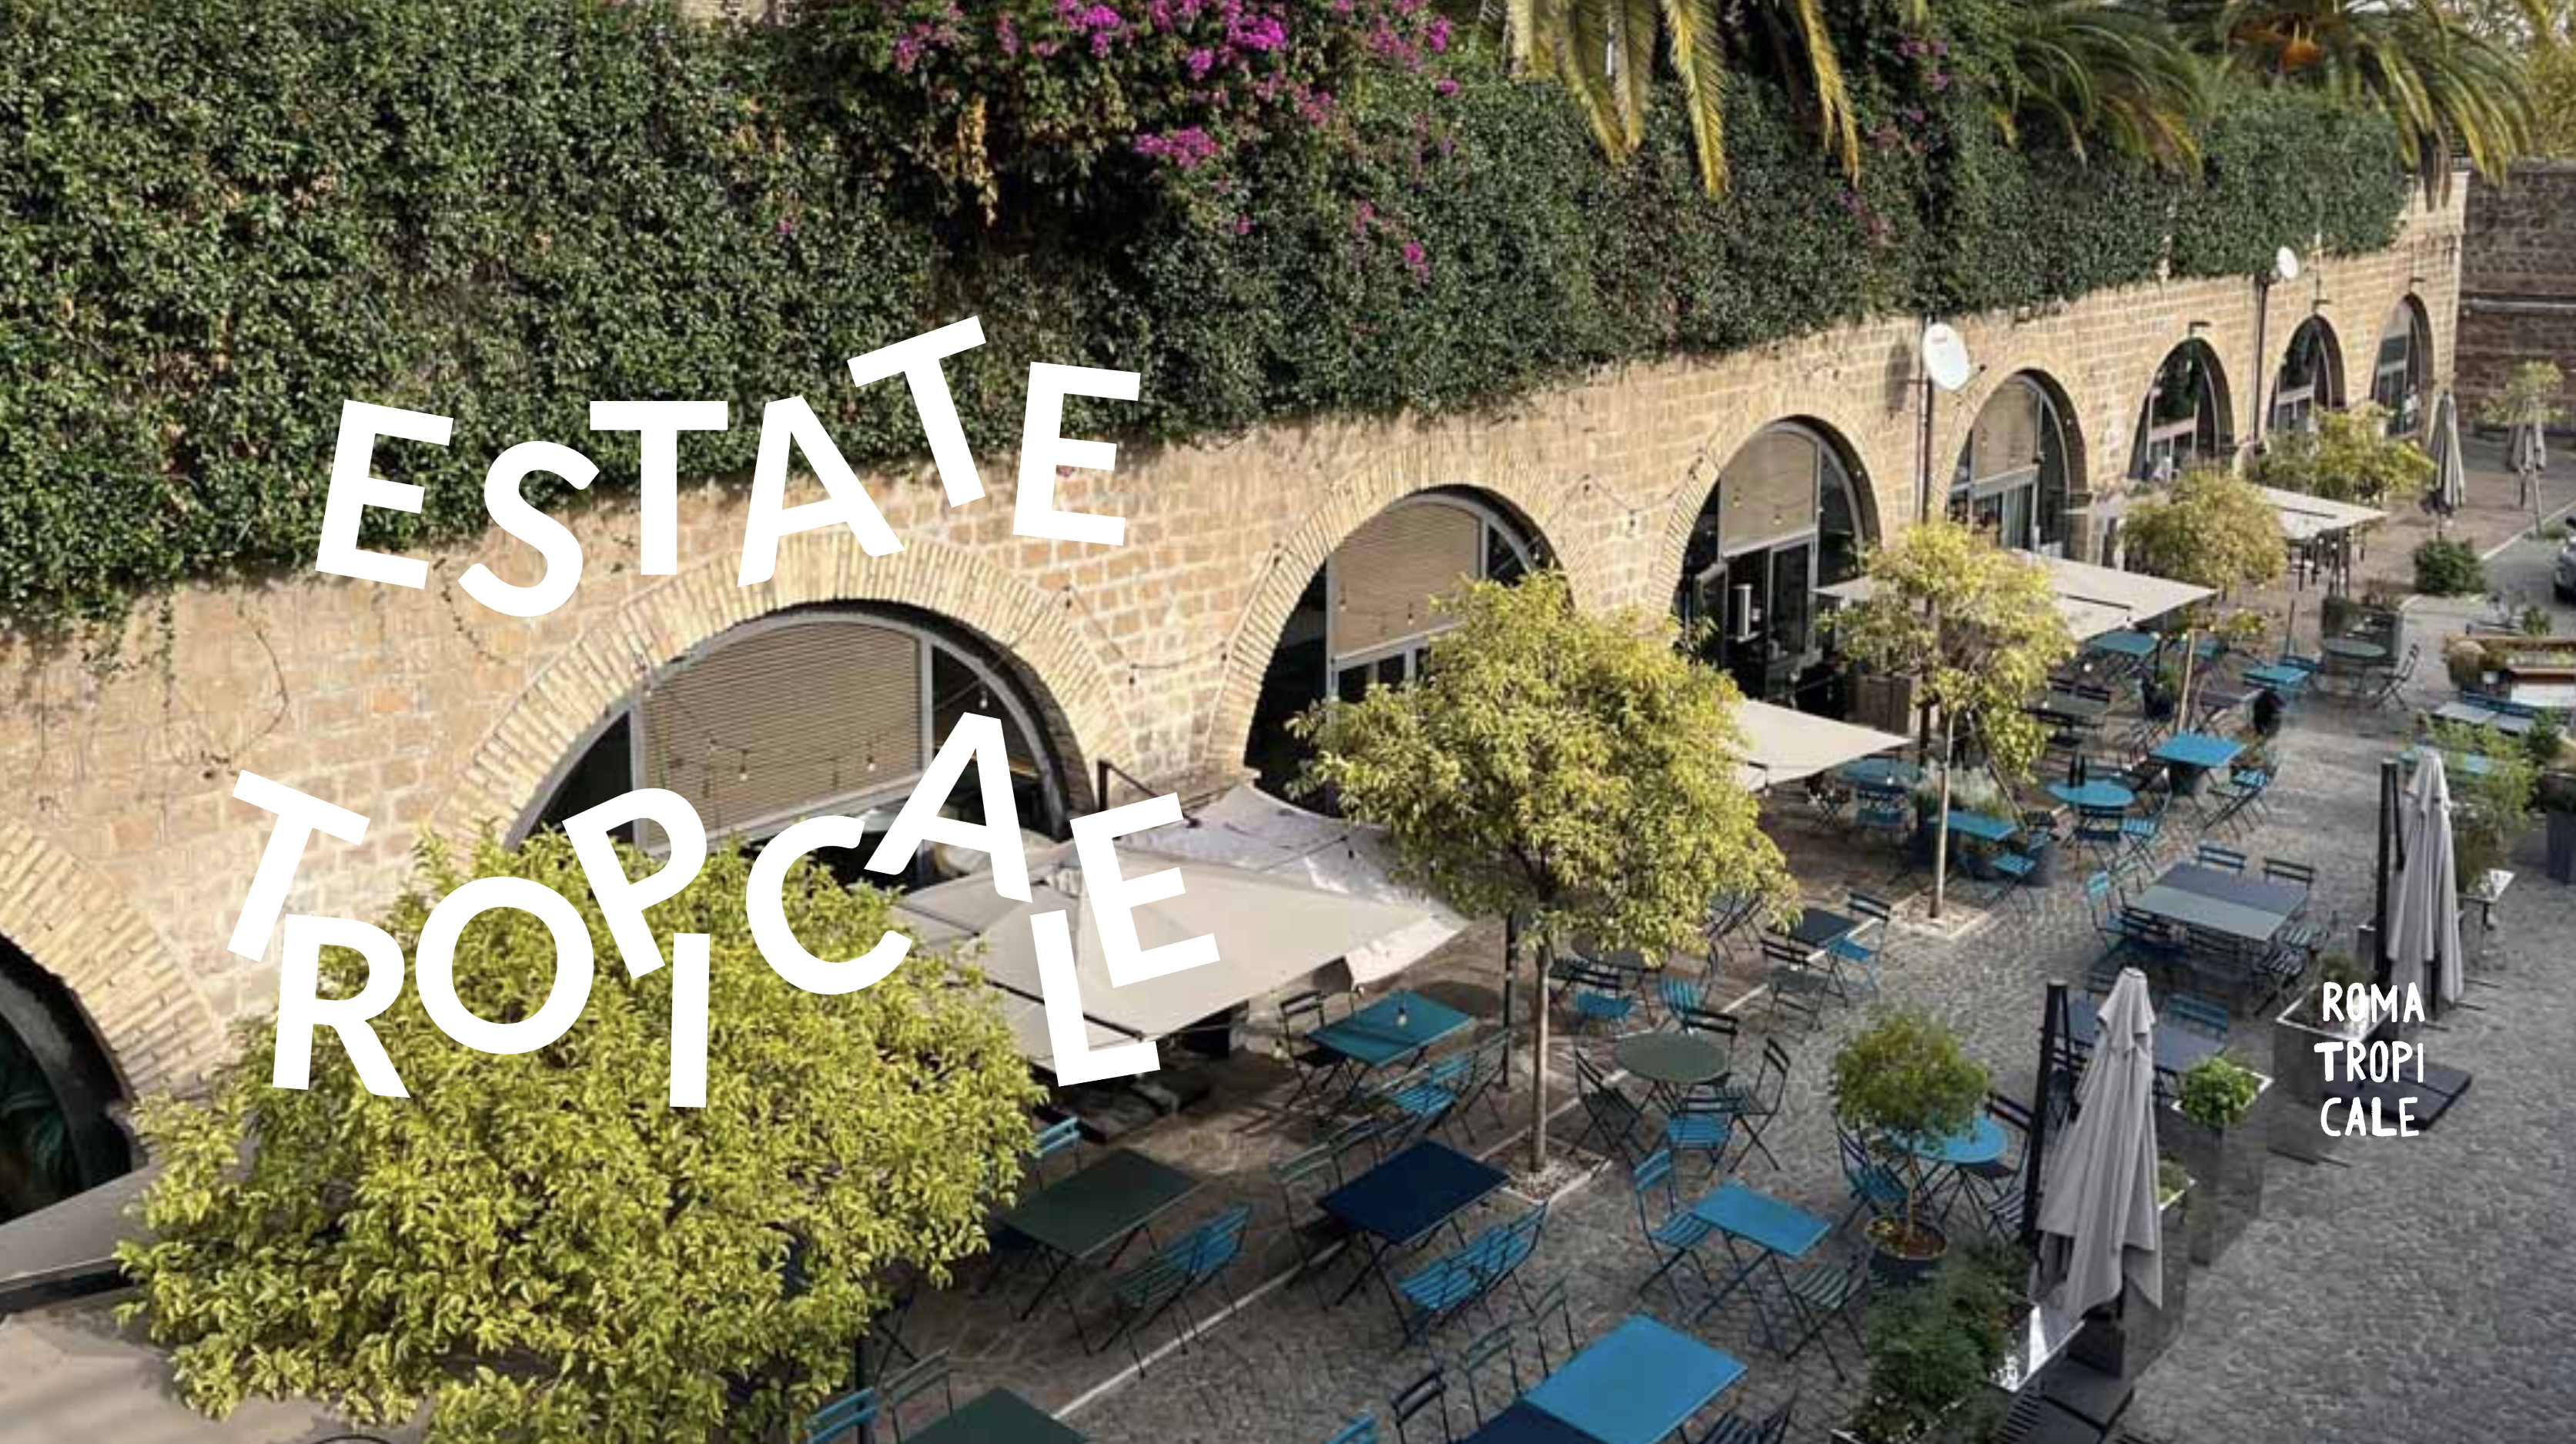 ESTATE TROPICALE • PLANT LOVERS SUMMER EVENT